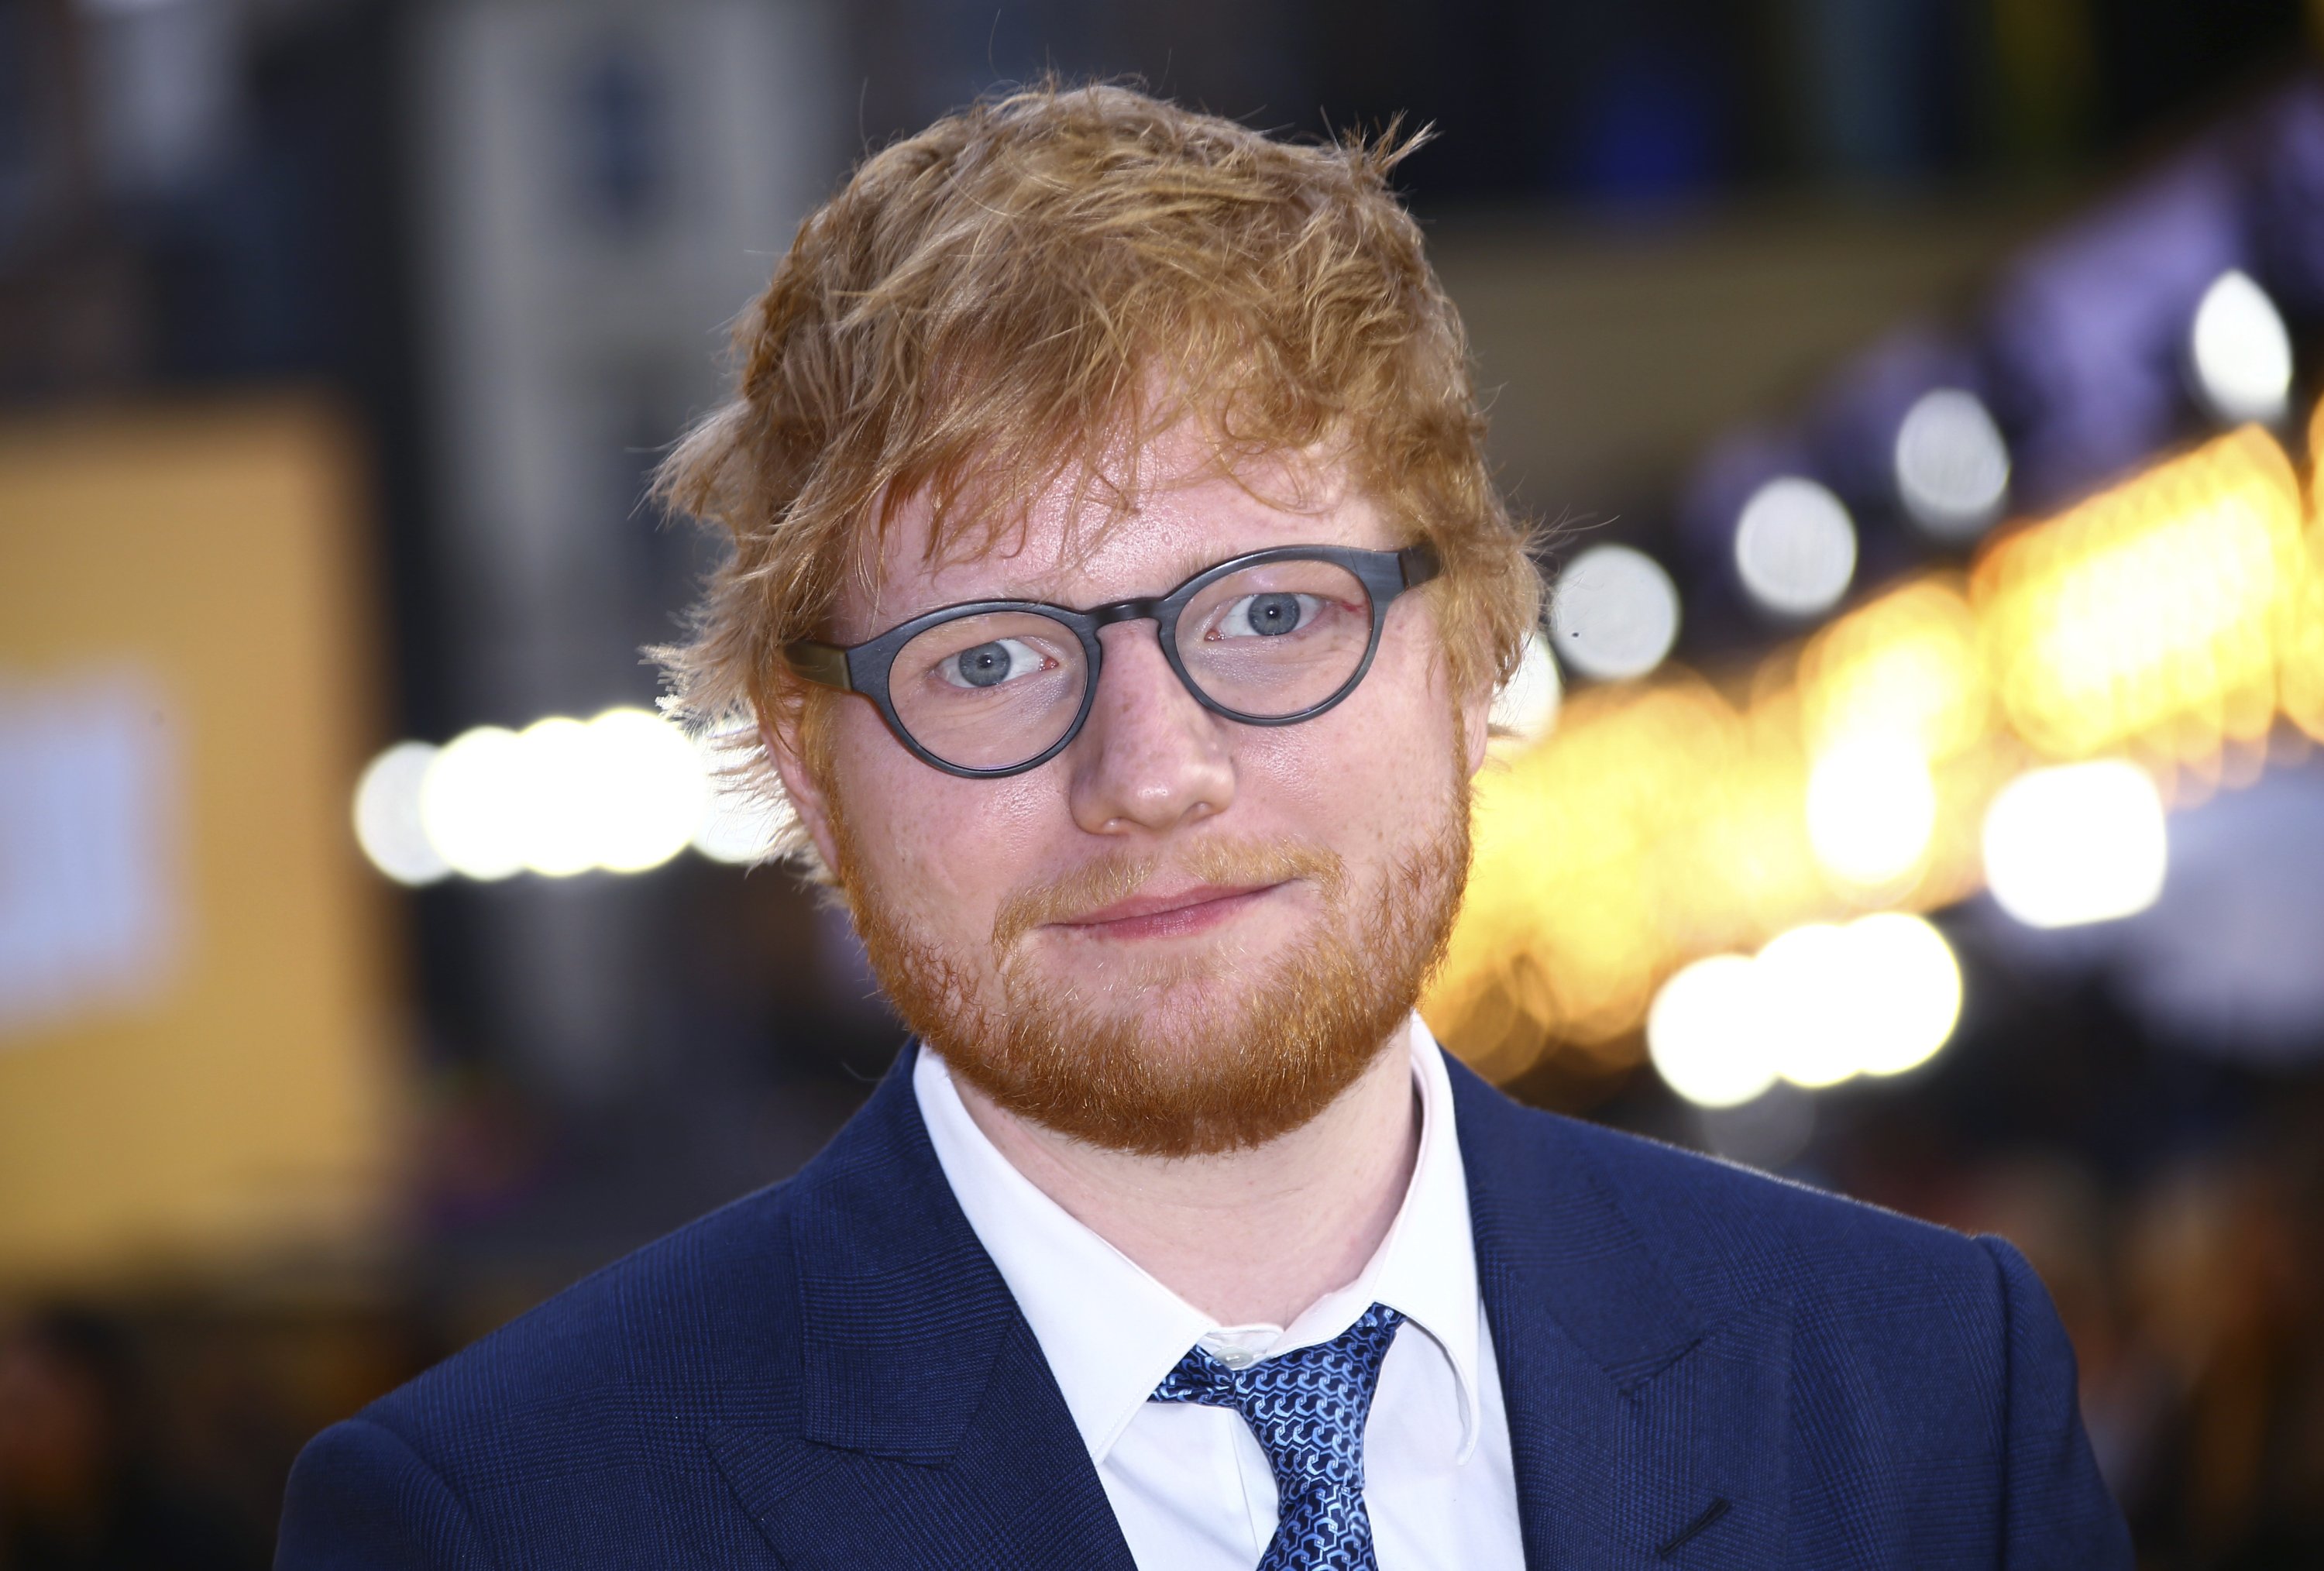 British singer Ed Sheeran poses for photographers upon arrival at the premiere of the film 'Yesterday'' in London, U.K., June 18, 2019. (AP Photo)